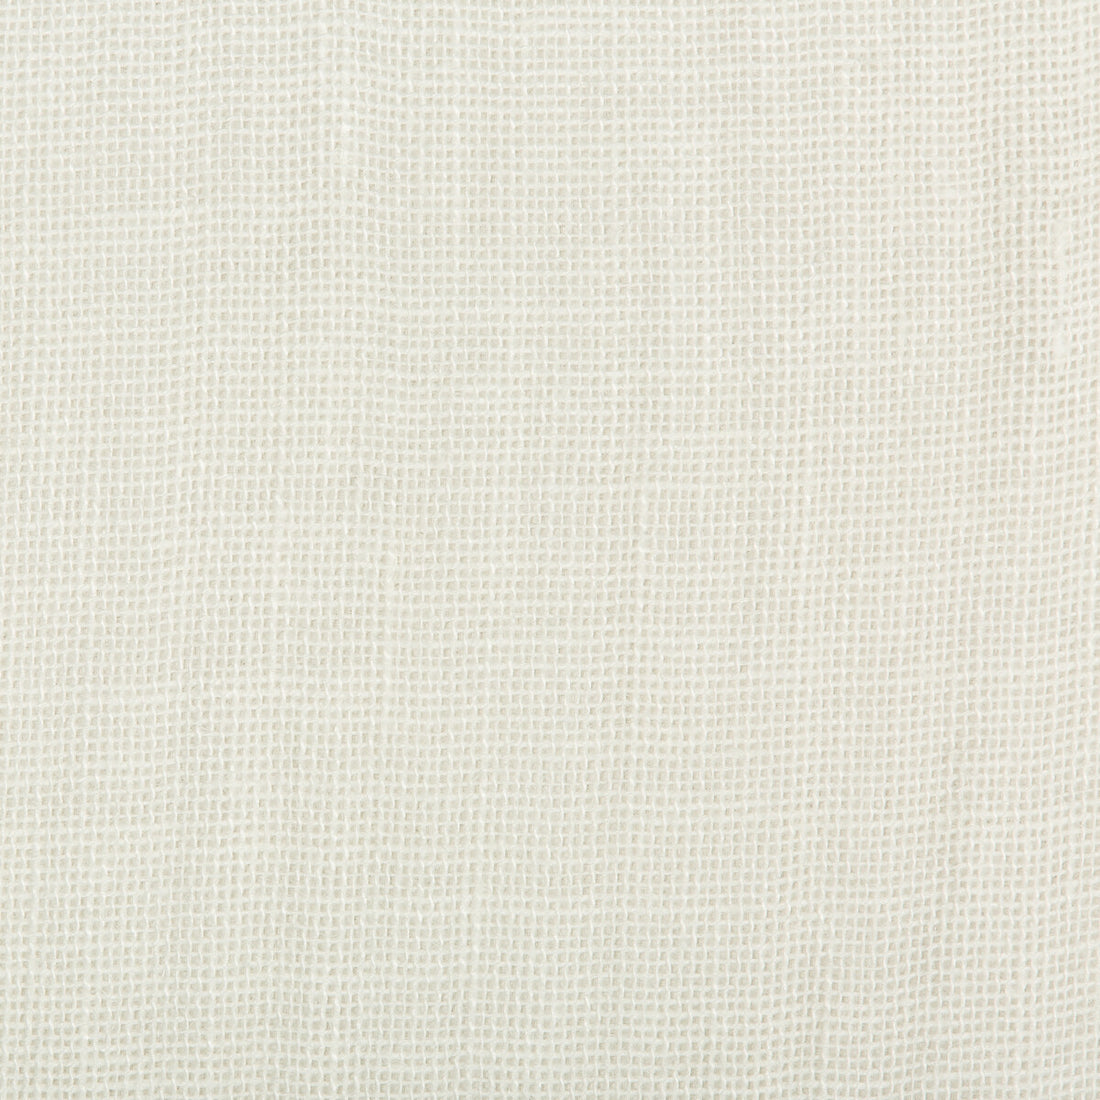 Workspace Linen fabric in ivory color - pattern 4611.1.0 - by Kravet Design in the Nate Berkus Well-Traveled collection